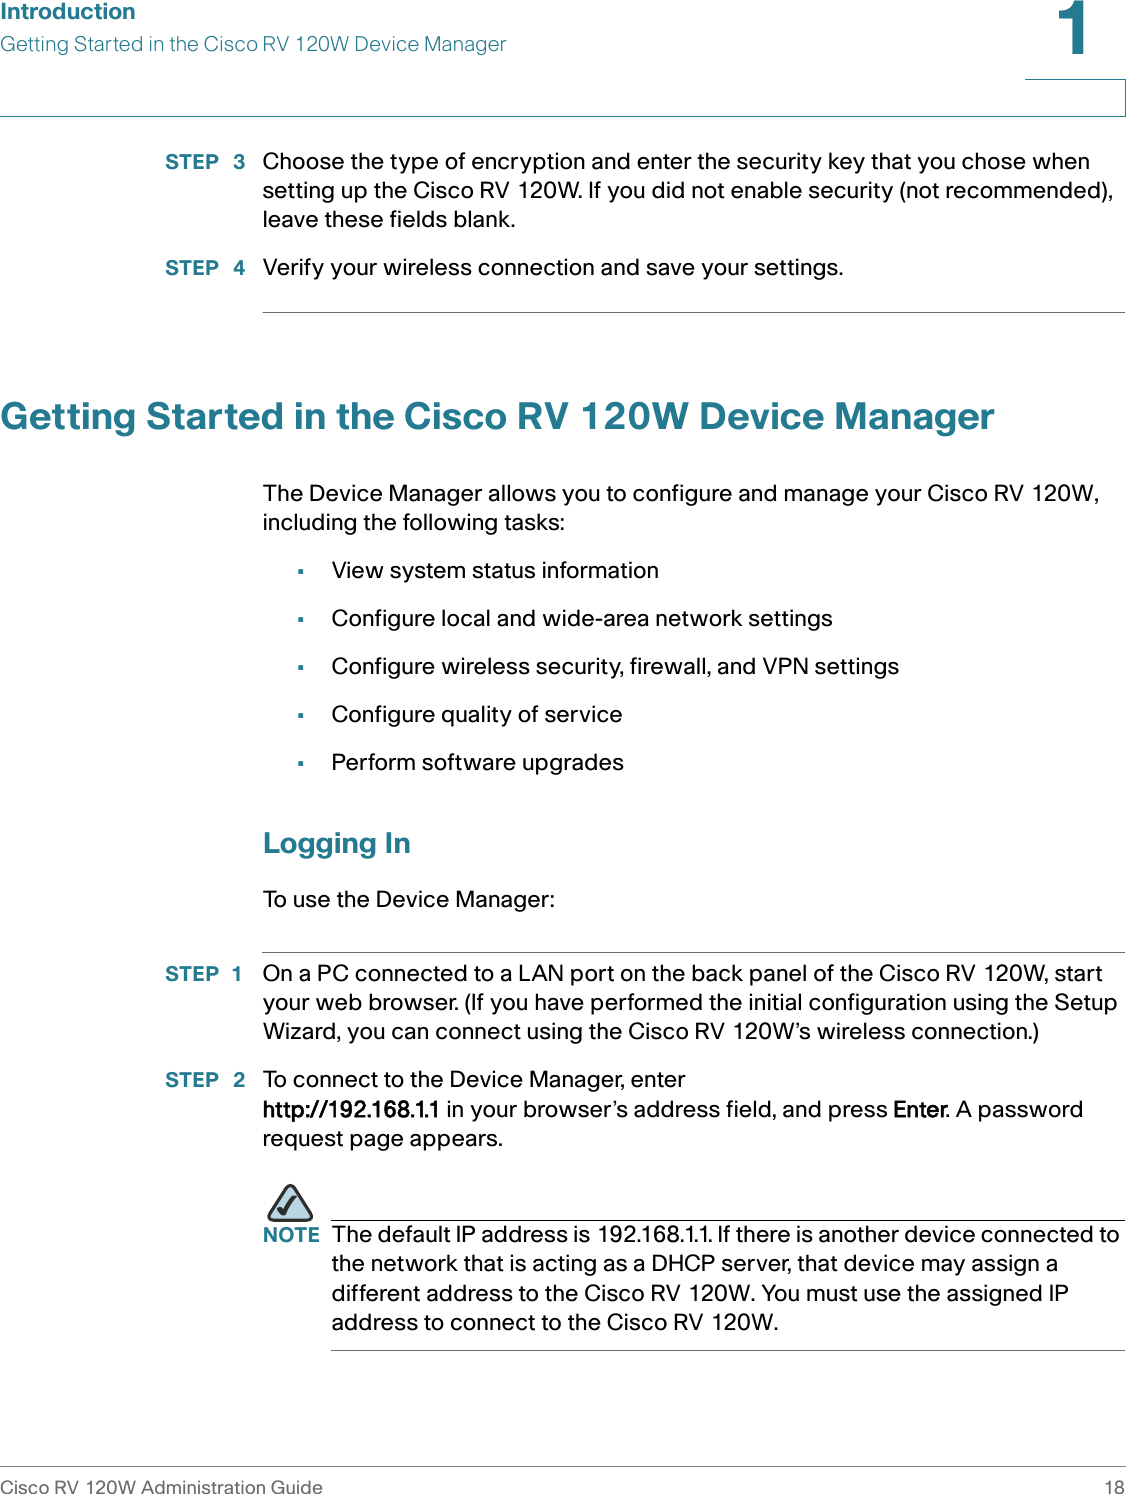 IntroductionGetting Started in the Cisco RV 120W Device ManagerCisco RV 120W Administration Guide 181 STEP  3 Choose the type of encryption and enter the security key that you chose when setting up the Cisco RV 120W. If you did not enable security (not recommended), leave these fields blank.STEP  4 Verify your wireless connection and save your settings.Getting Started in the Cisco RV 120W Device ManagerThe Device Manager allows you to configure and manage your Cisco RV 120W, including the following tasks:•View system status information •Configure local and wide-area network settings•Configure wireless security, firewall, and VPN settings•Configure quality of service•Perform software upgradesLogging InTo use the Device Manager:STEP 1 On a PC connected to a LAN port on the back panel of the Cisco RV 120W, start your web browser. (If you have performed the initial configuration using the Setup Wizard, you can connect using the Cisco RV 120W’s wireless connection.)STEP  2 To connect to the Device Manager, enter http://192.168.1.1 in your browser’s address field, and press Enter. A password request page appears.NOTE The default IP address is 192.168.1.1. If there is another device connected to the network that is acting as a DHCP server, that device may assign a different address to the Cisco RV 120W. You must use the assigned IP address to connect to the Cisco RV 120W.